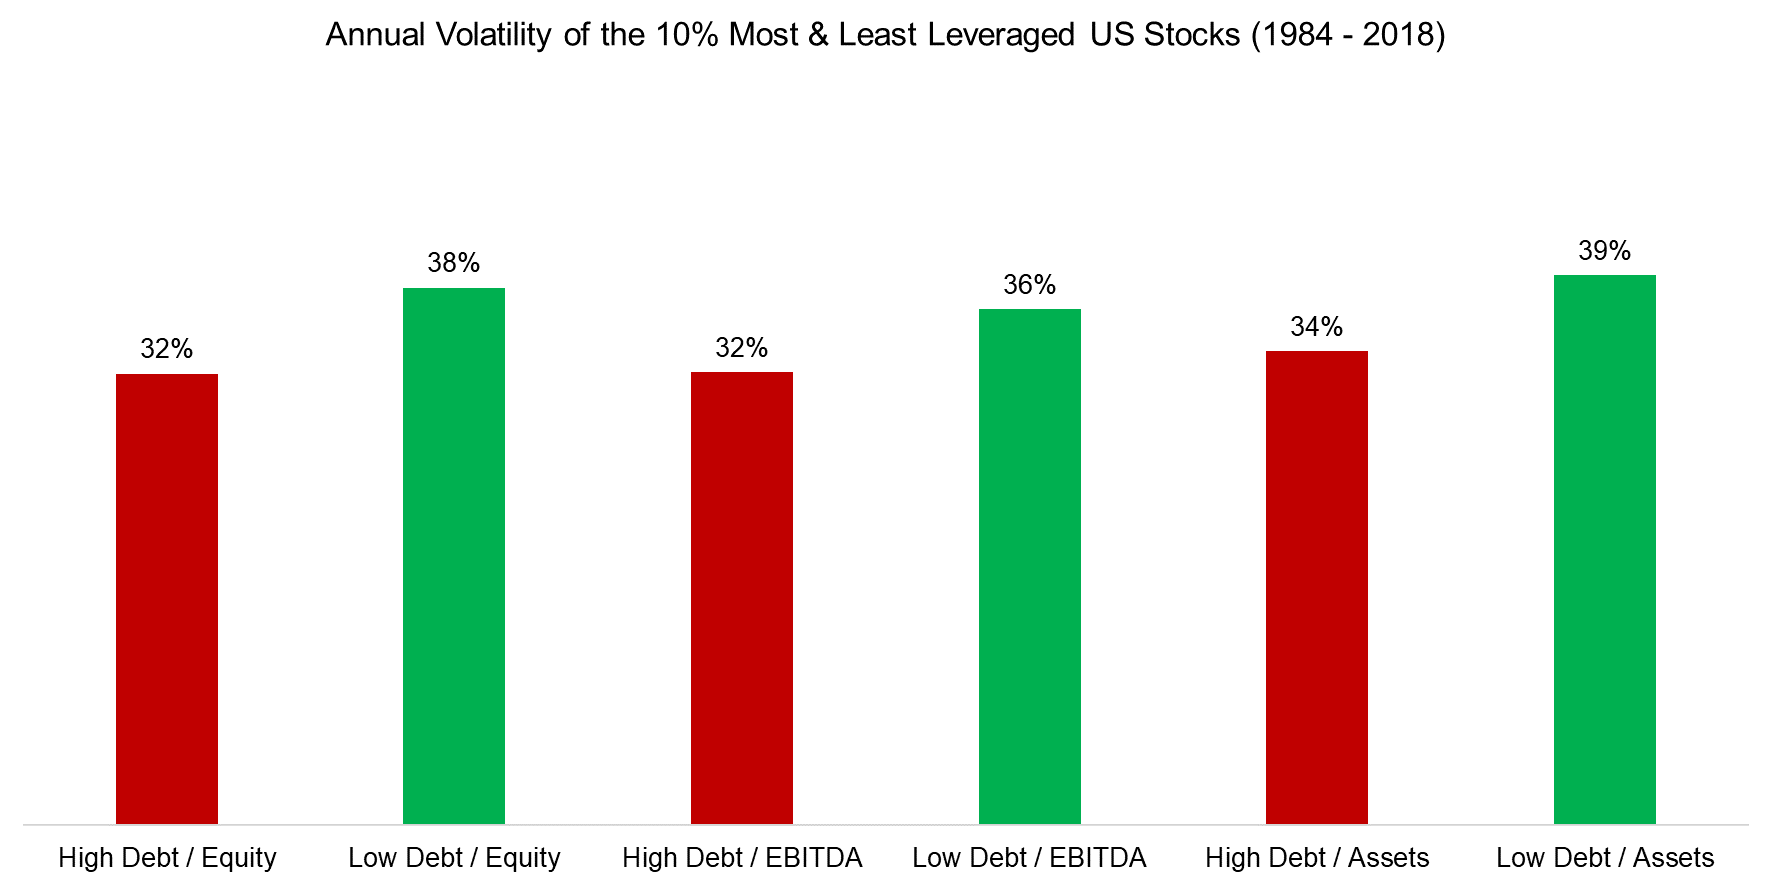 Annual Volatility of the 10% Most & Least Leveraged US Stocks (1984 - 2018)